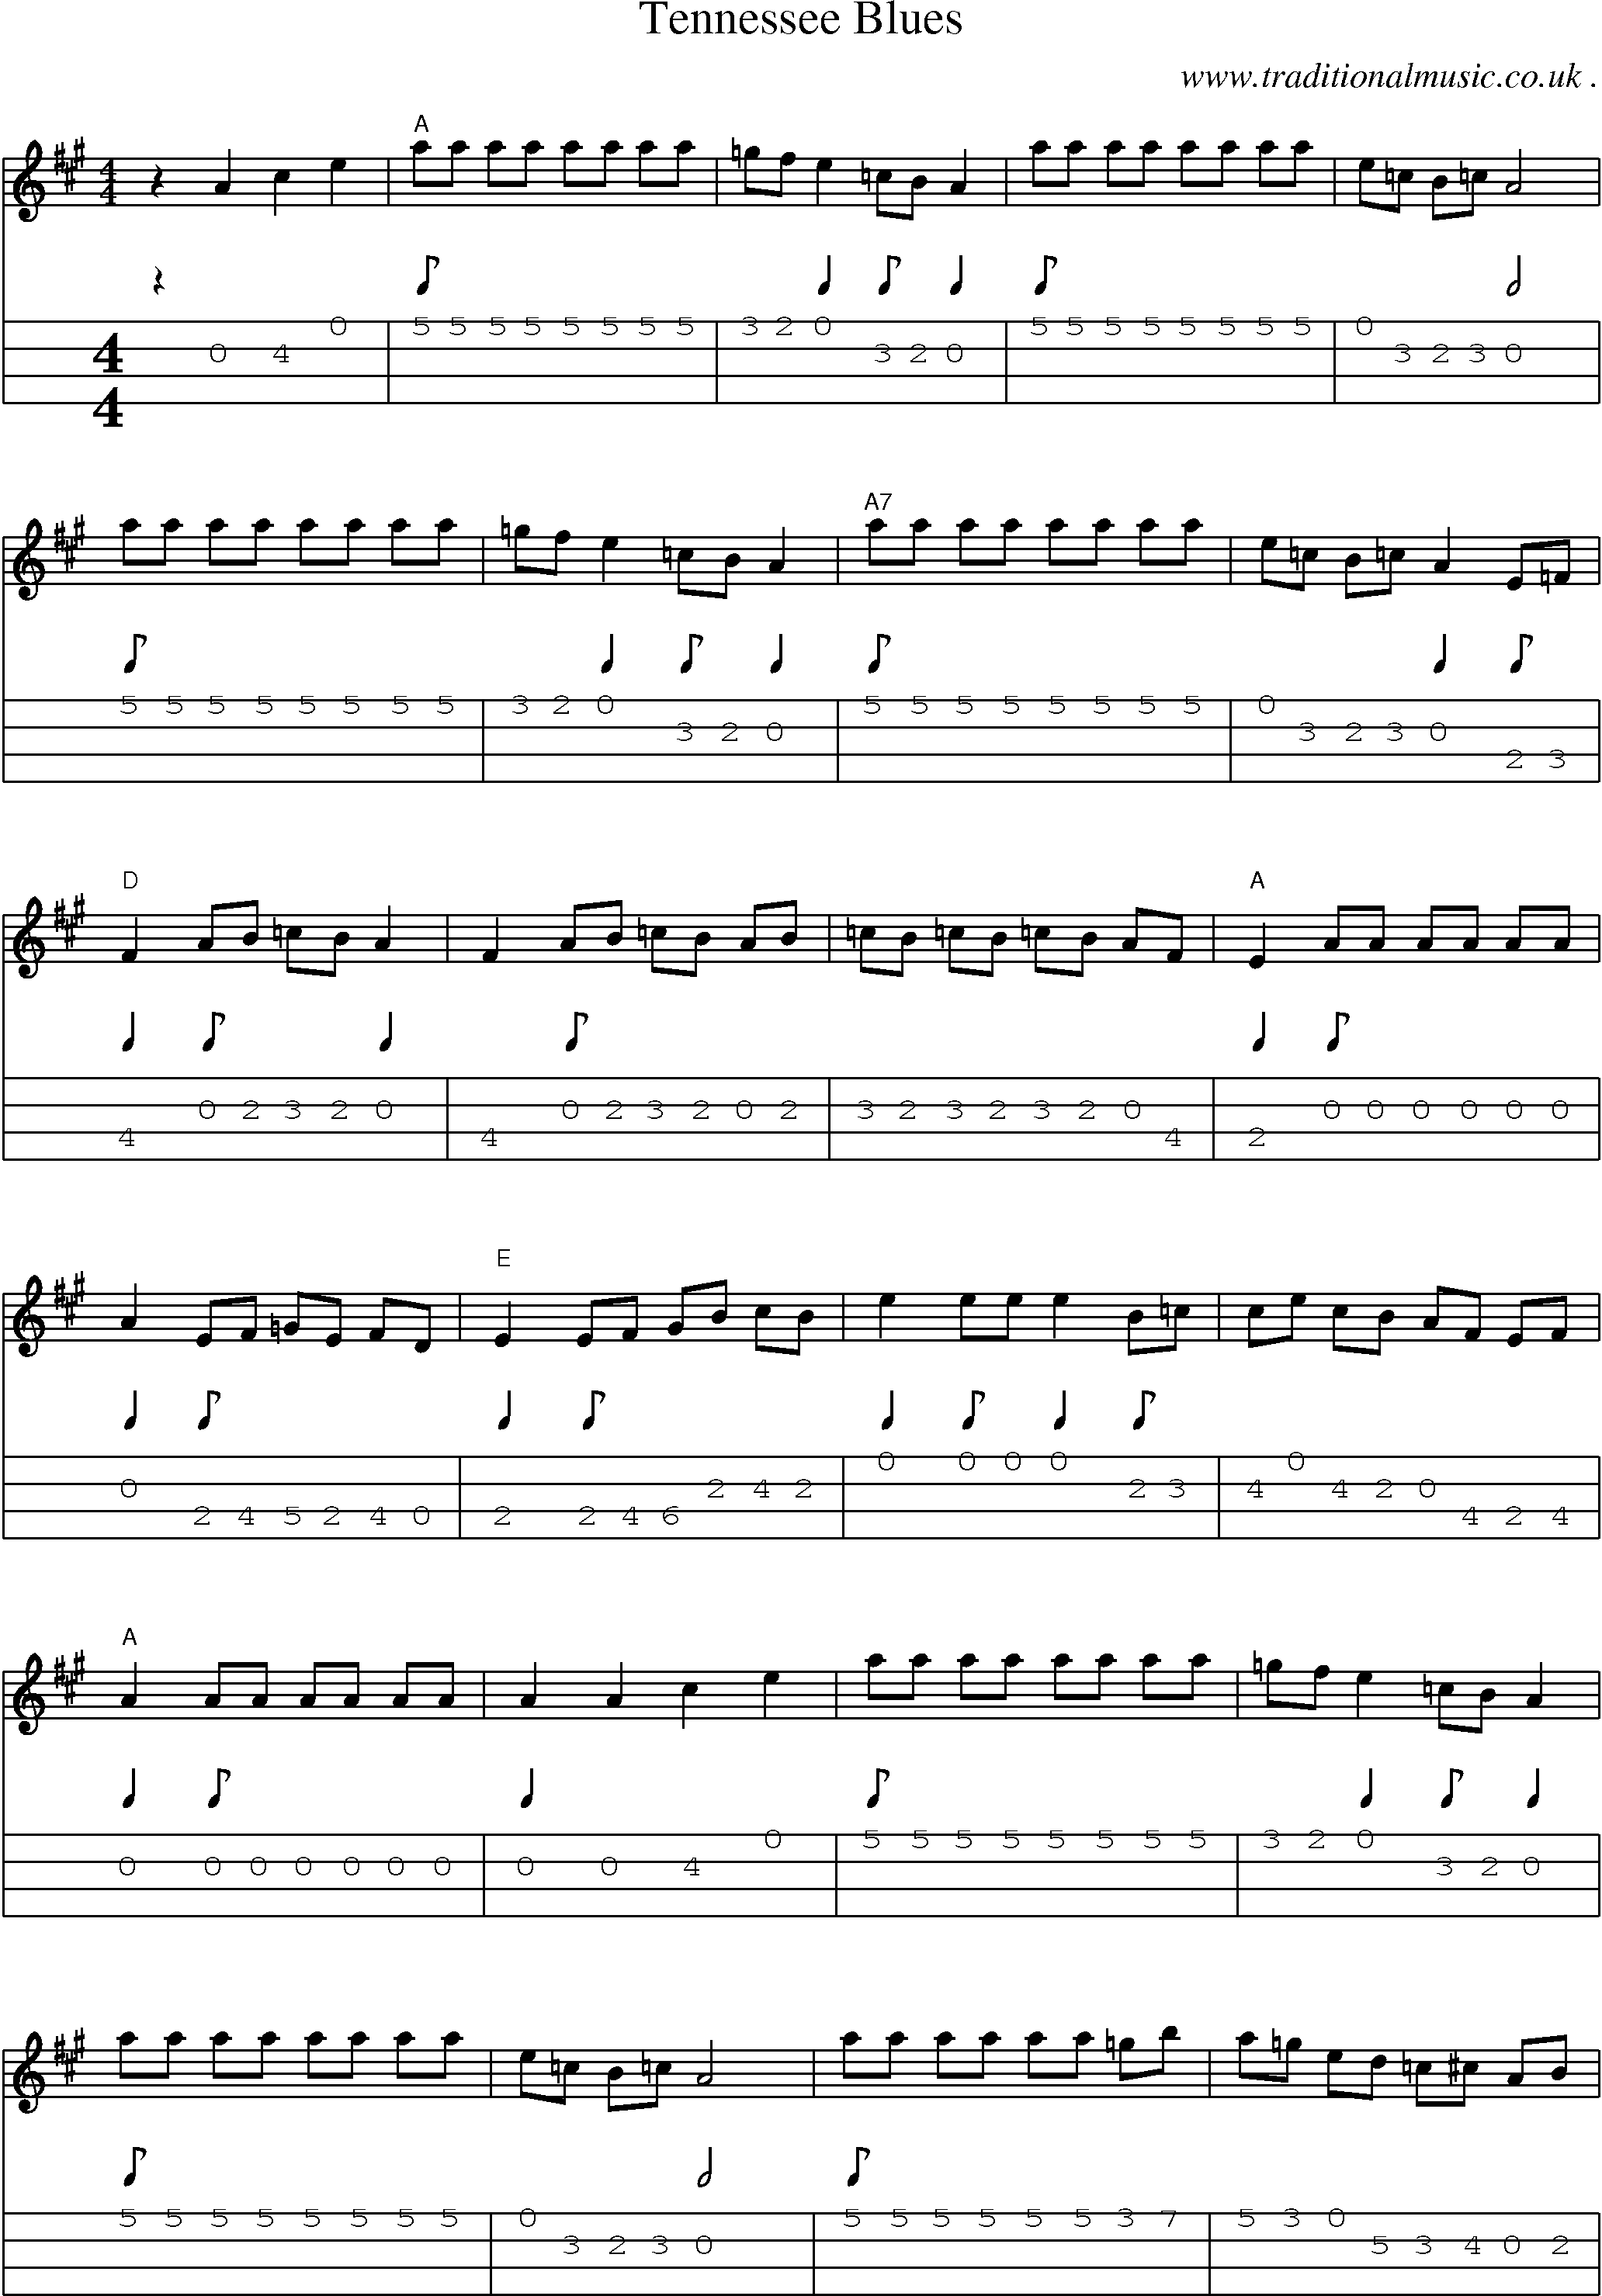 Music Score and Mandolin Tabs for Tennessee Blues